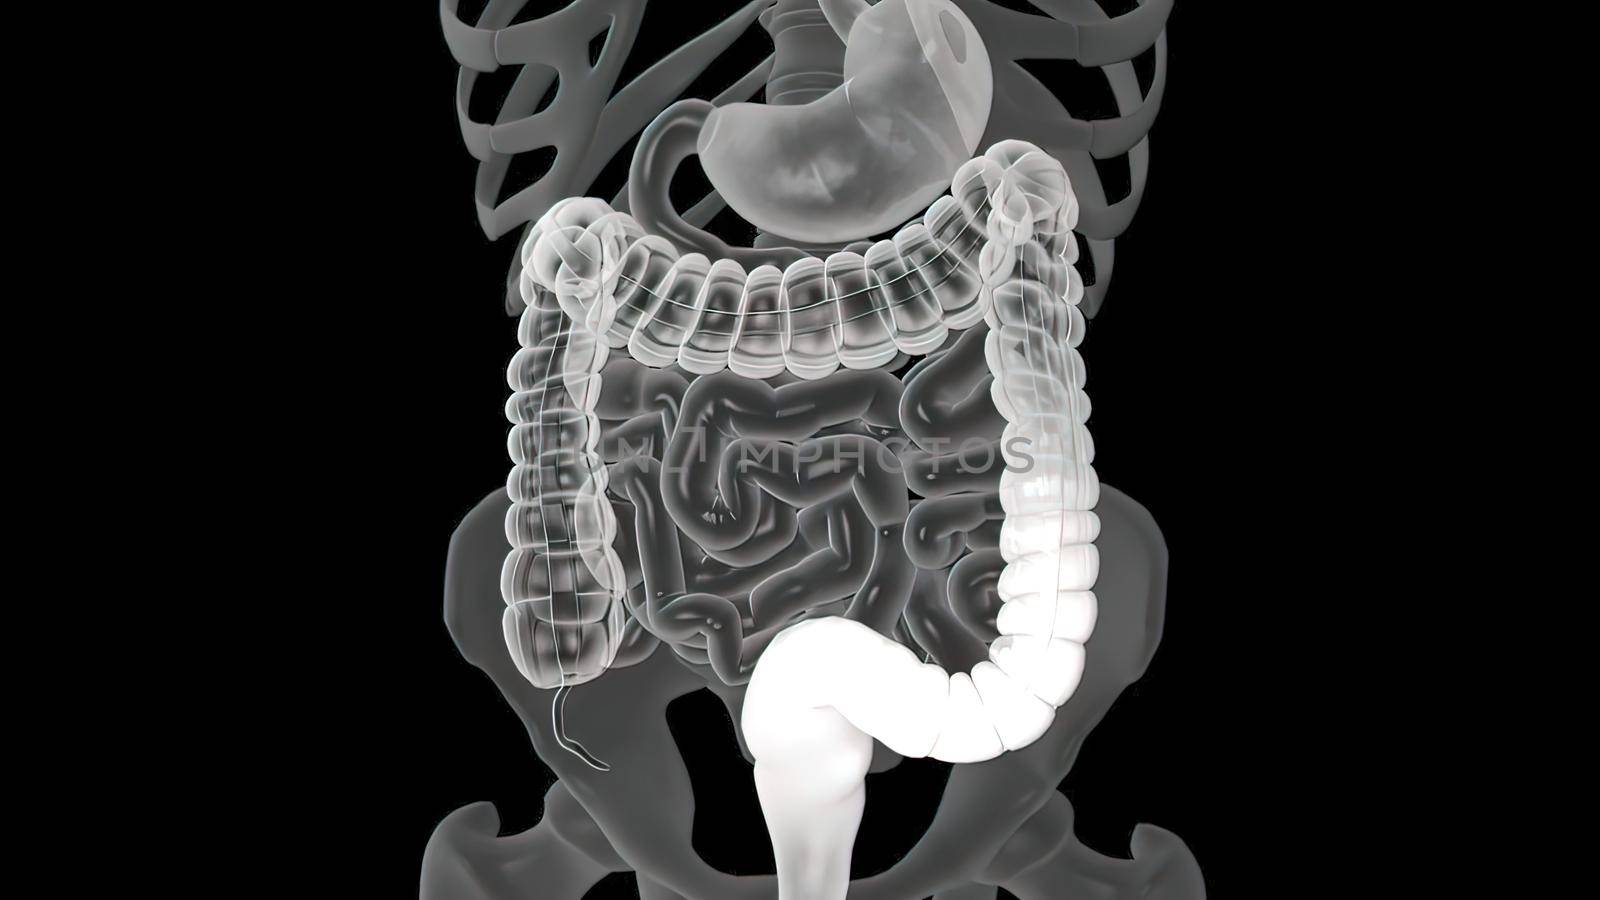 In this way, polyps, cancerous cells and abnormal structures in the large intestine can be diagnosed. The aim is to treat colon cancer, ulcerative colitis,3D illustration